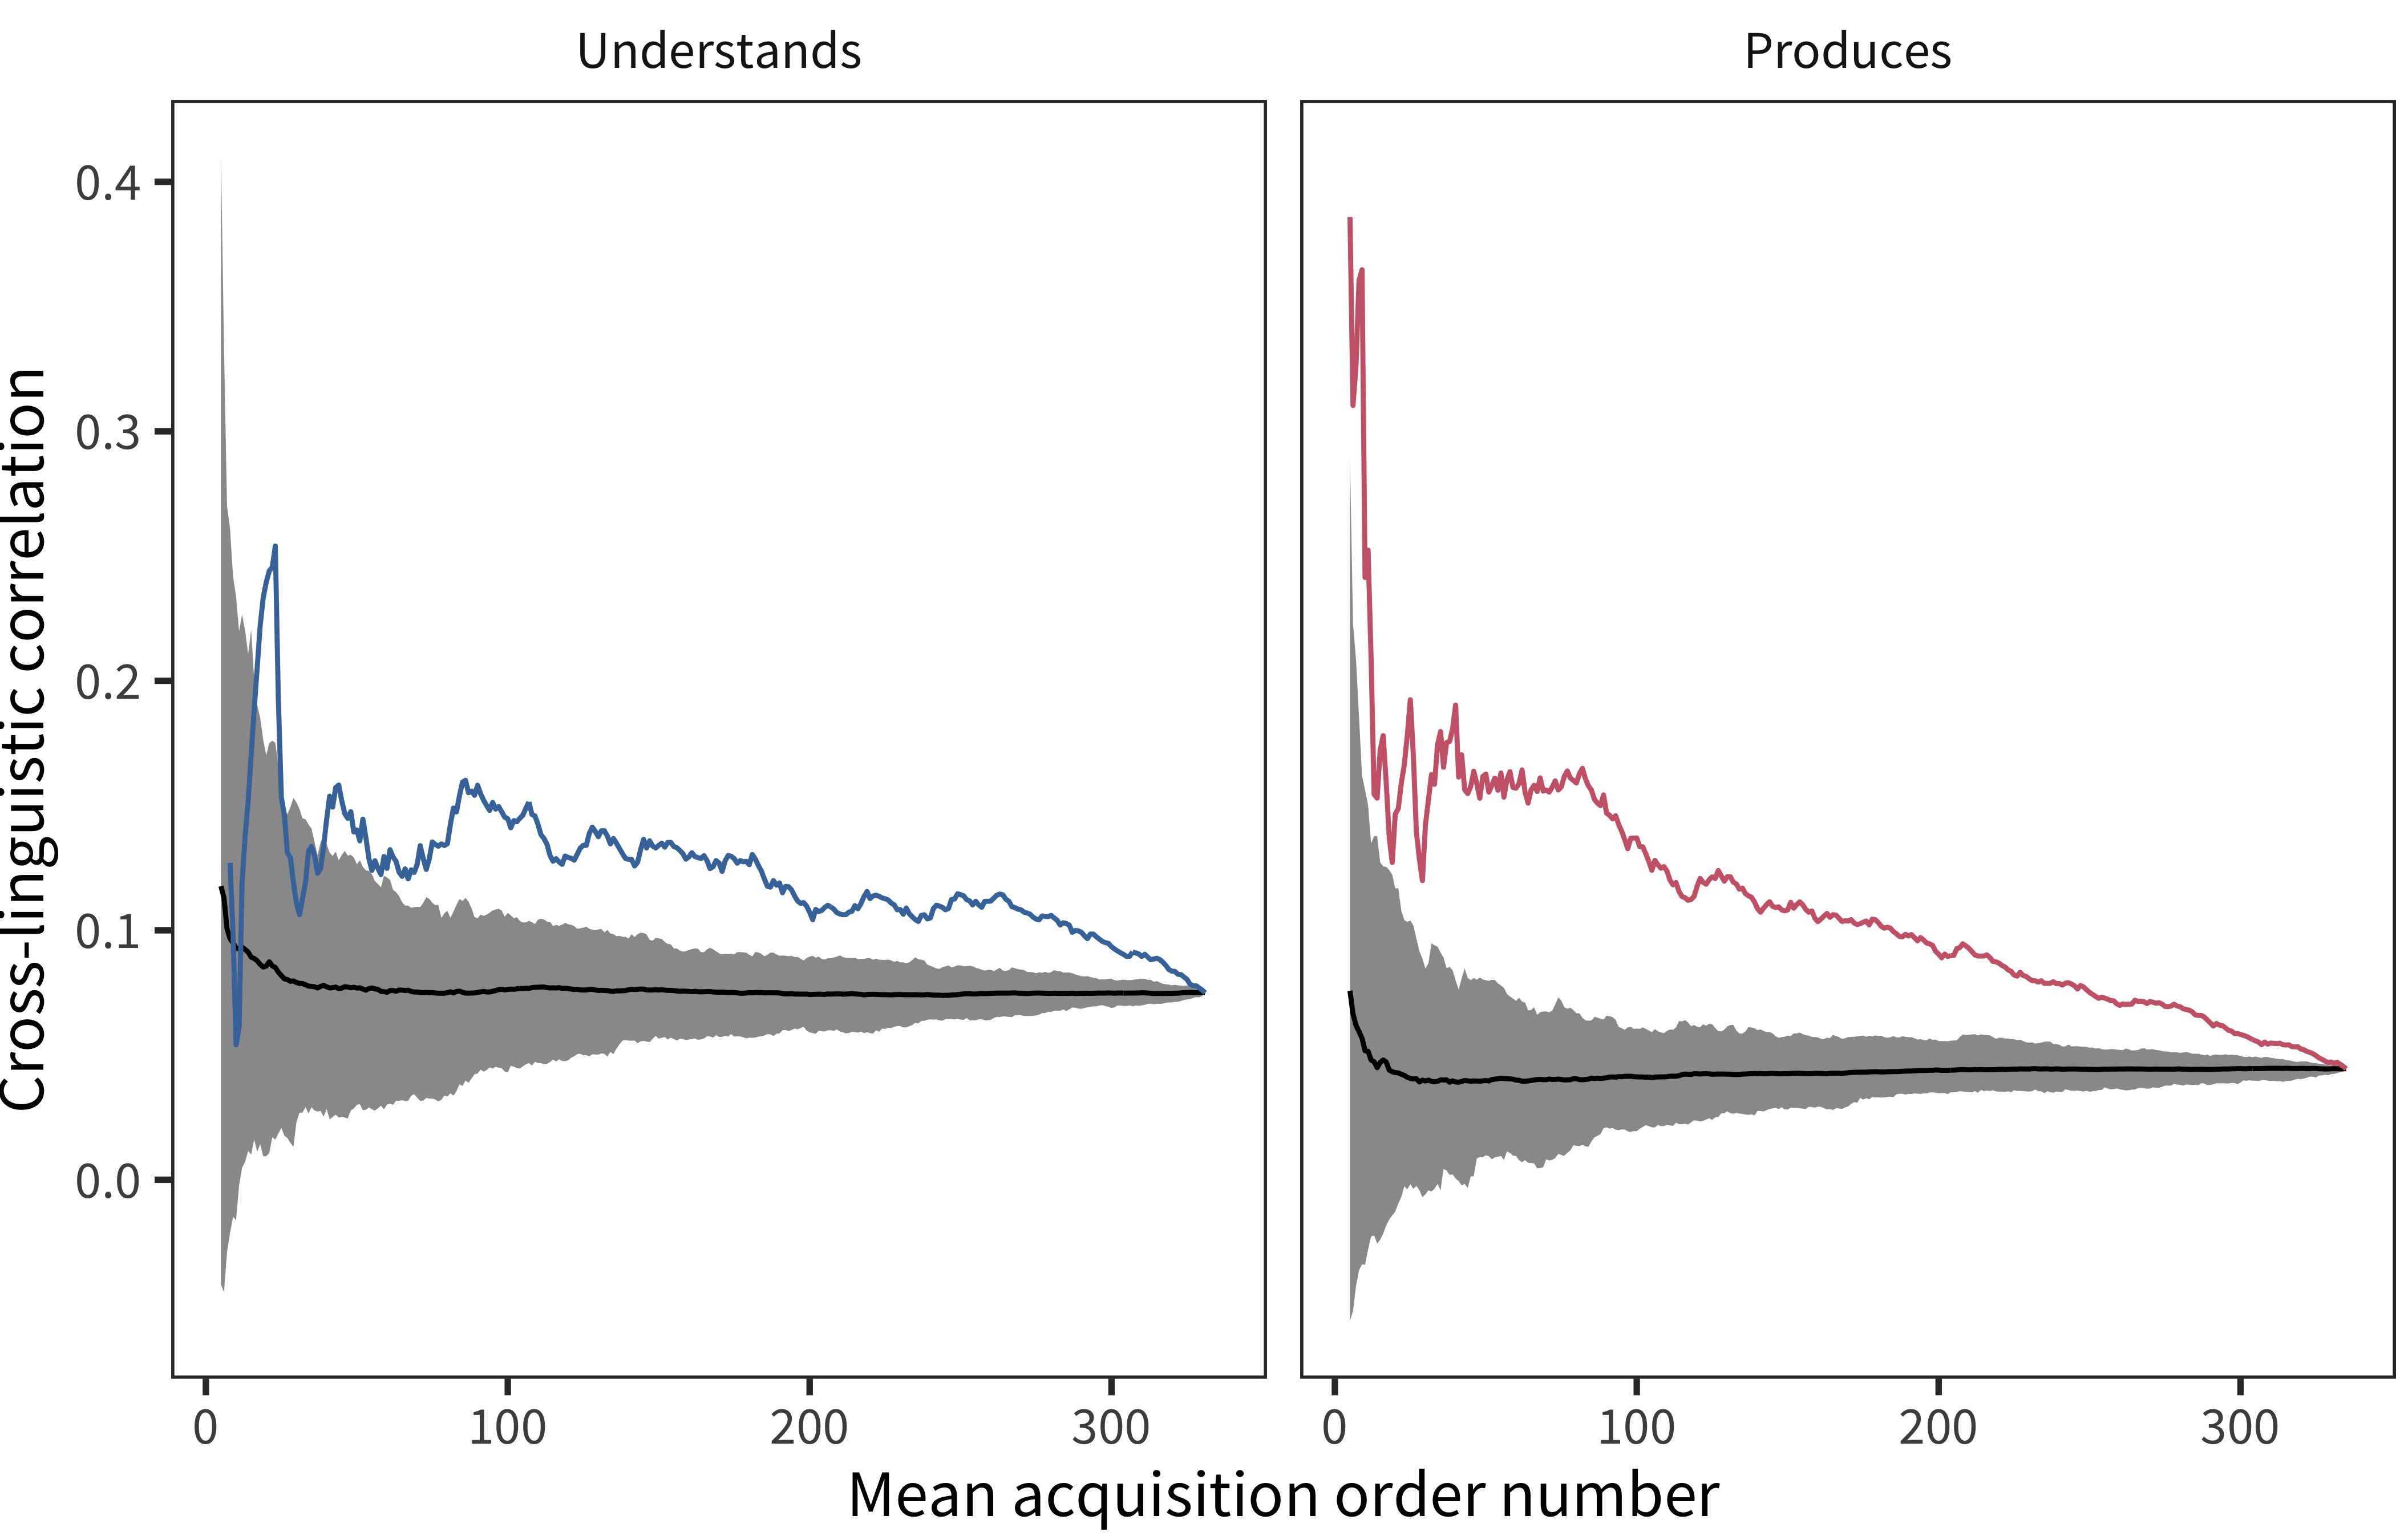 Cross-linguistic correlation ages of words' acquisition over the course of language development. Colored lines show empirical correlations, the gray area shows a 95 percent confidence interval for a randomly shuffled baseline. Especially in production, cross-linguistic similarity declines over the course of language development.